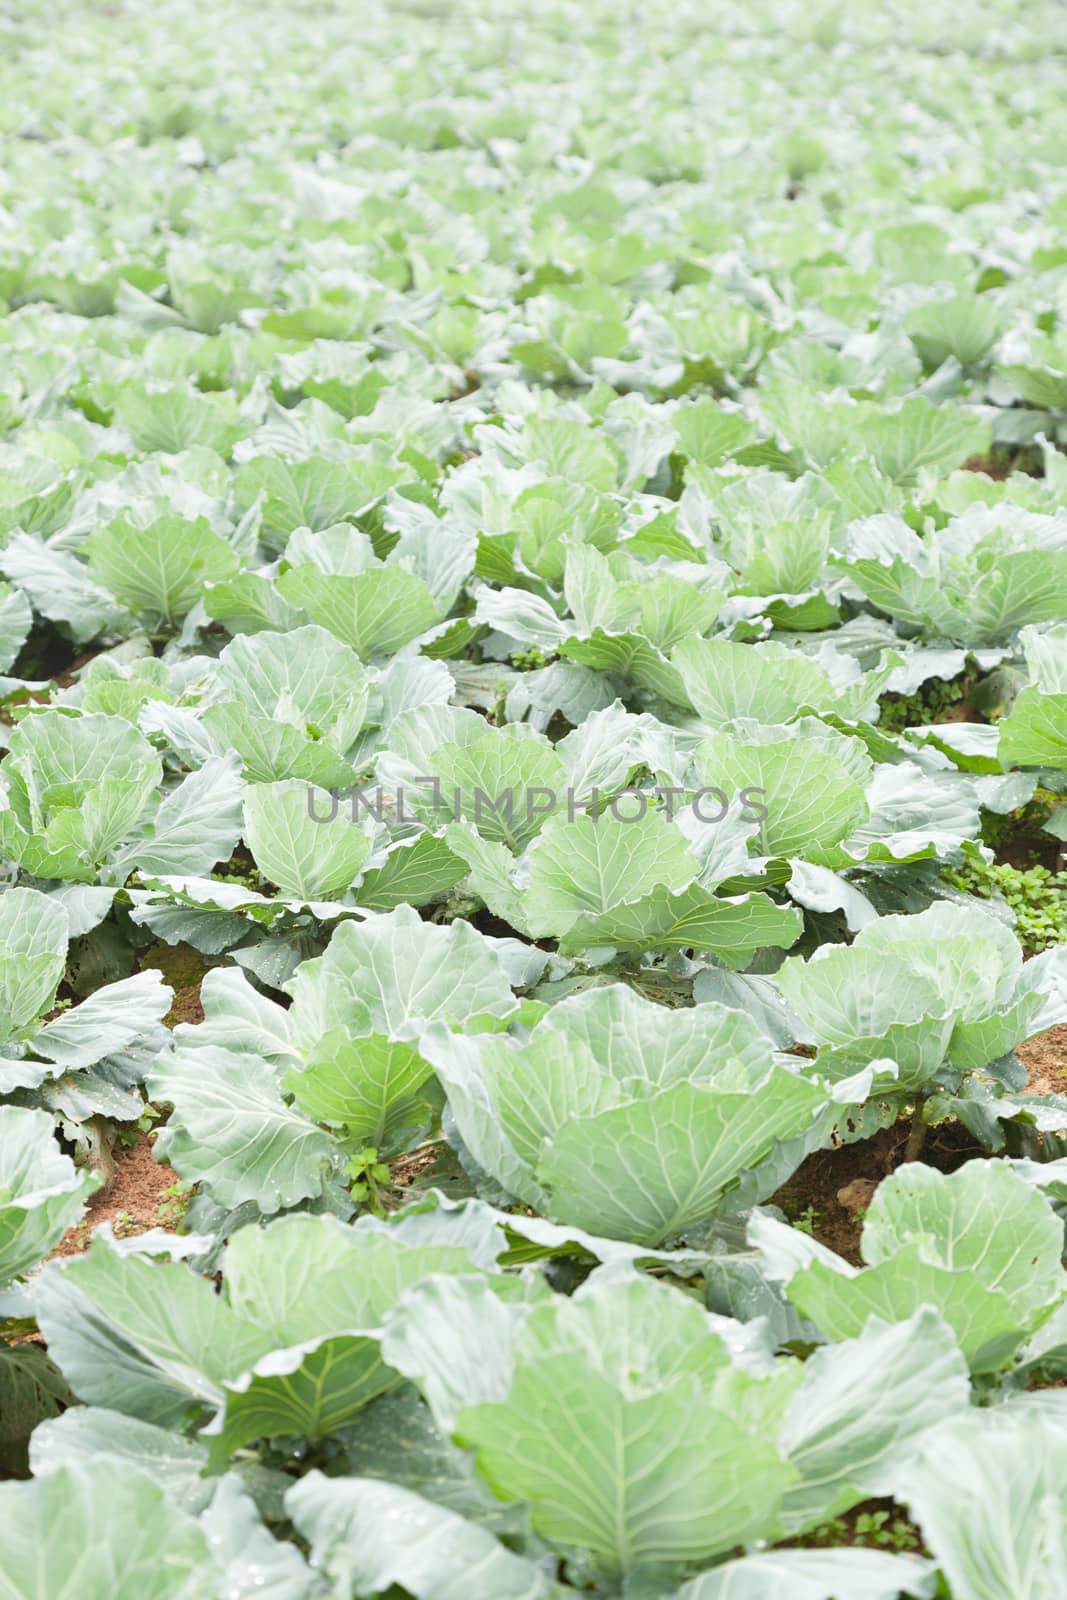 Farm agriculture cabbage. Arrange the cabbage is long on the ground.